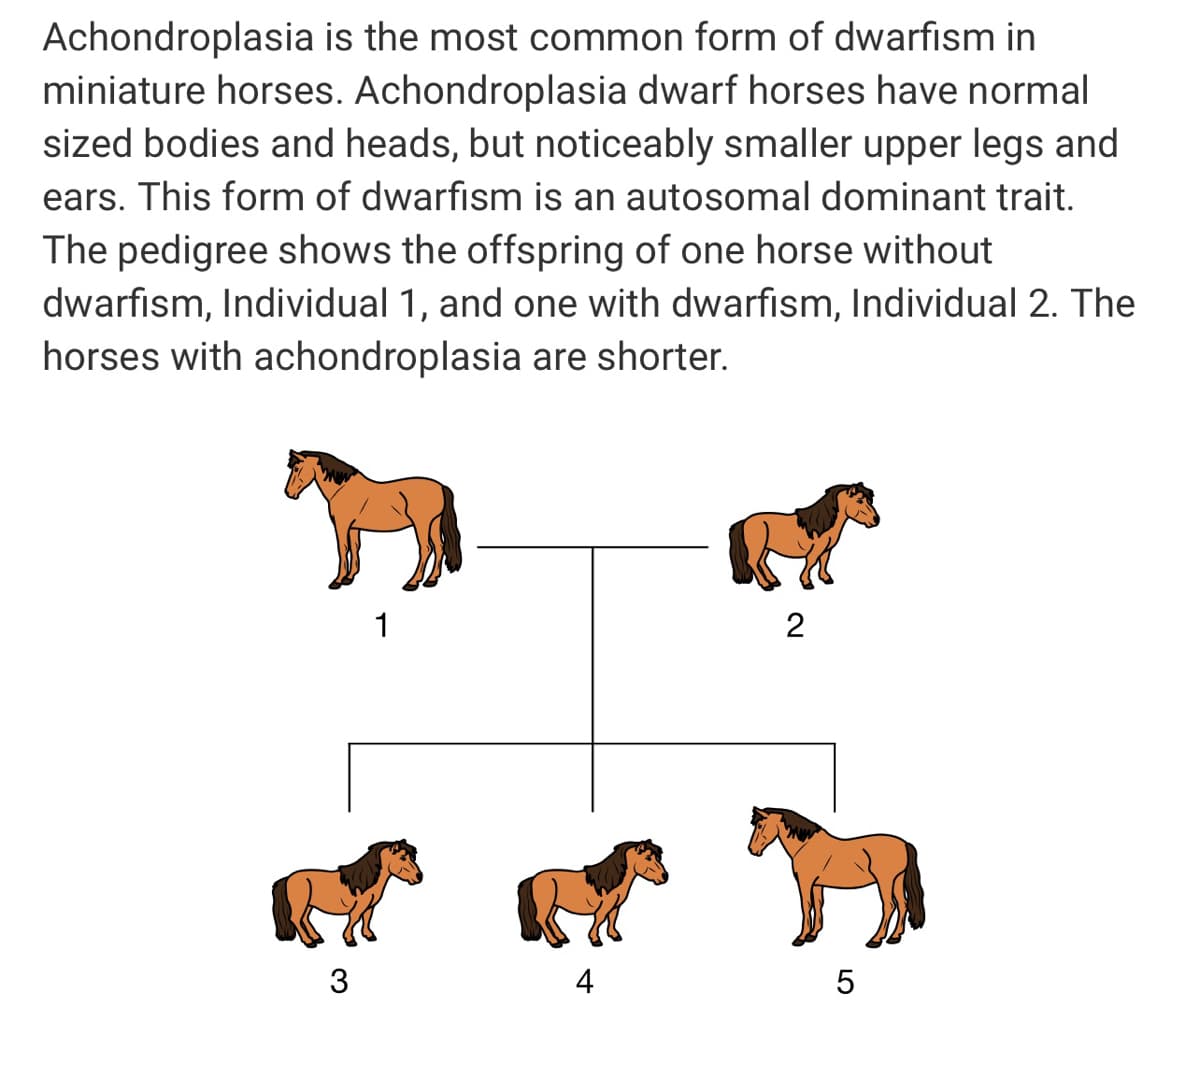 Achondroplasia is the most common form of dwarfism in
miniature horses. Achondroplasia dwarf horses have normal
sized bodies and heads, but noticeably smaller upper legs and
ears. This form of dwarfism is an autosomal dominant trait.
The pedigree shows the offspring of one horse without
dwarfism, Individual 1, and one with dwarfism, Individual 2. The
horses with achondroplasia are shorter.
1
2
3
4
5
